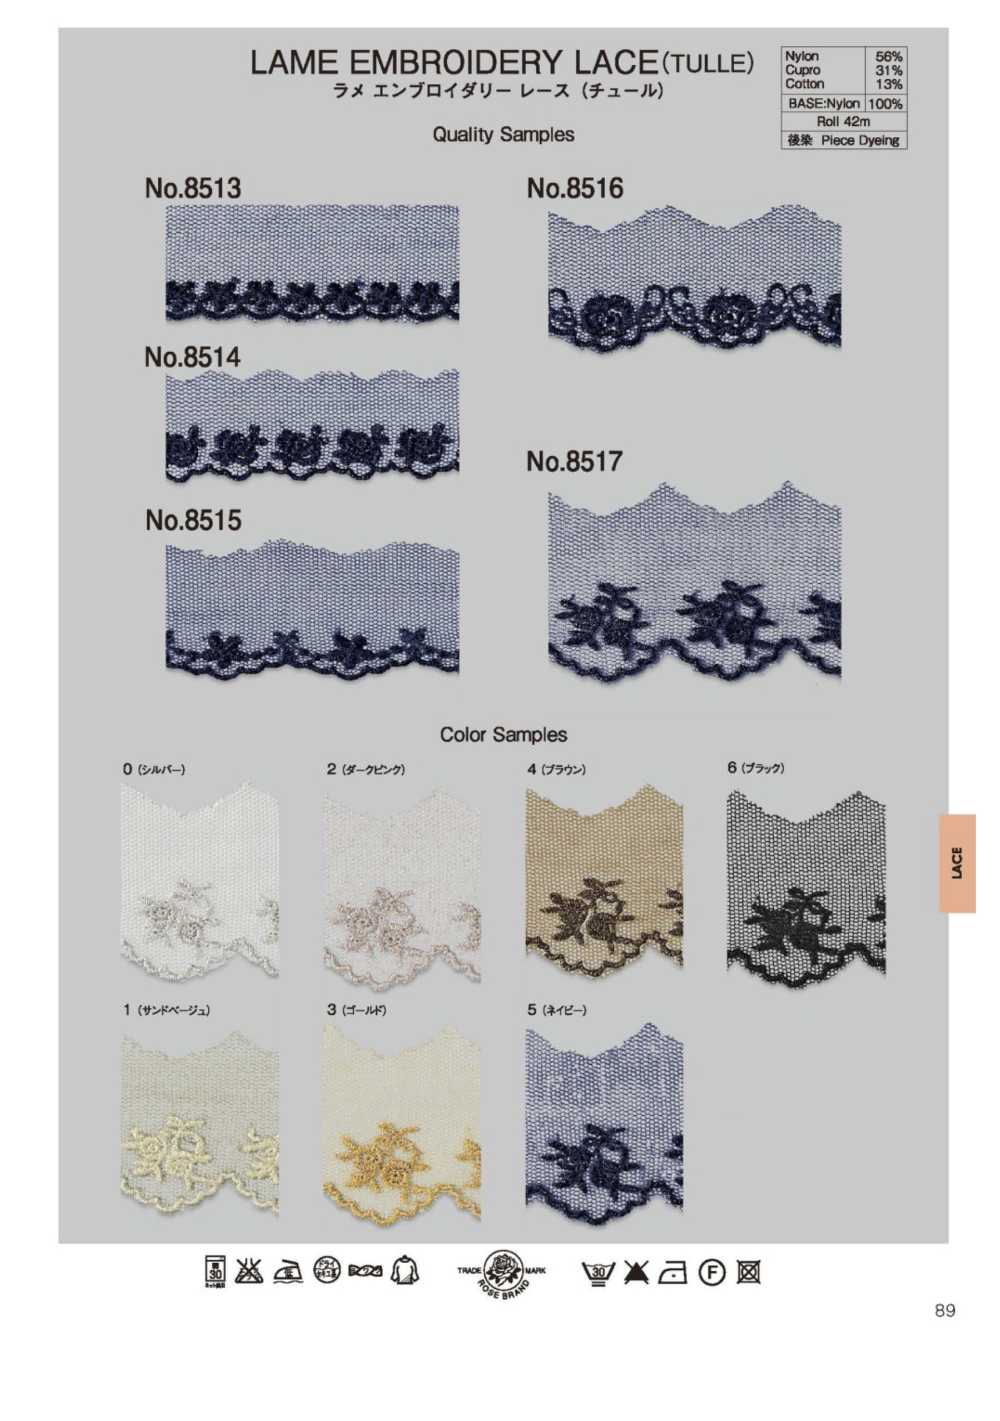 8513 Lame Embroidered Lace(Tulle) ROSE BRAND (Marushin)